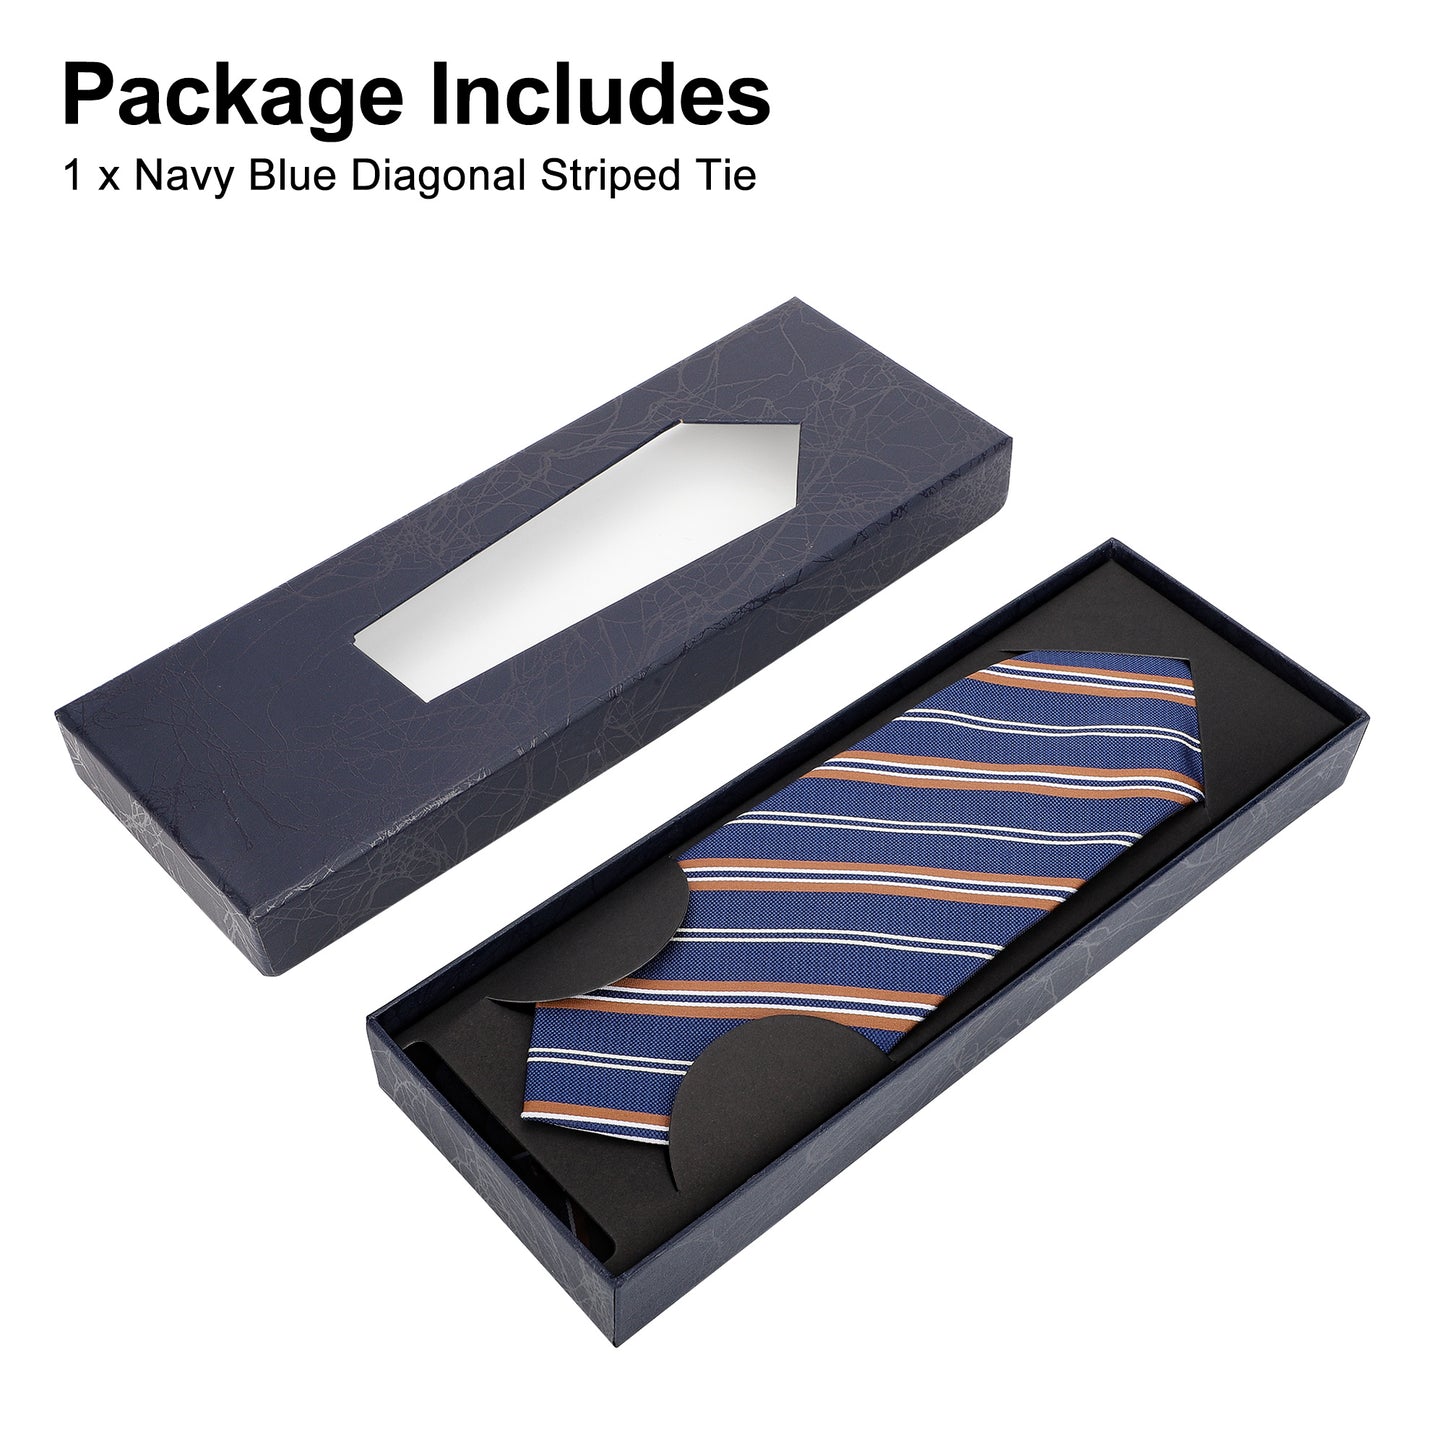 Navy Blue Diagonal Striped Tie - Elegant Gift for Special Occasions, Formal Events, and Business Meetings